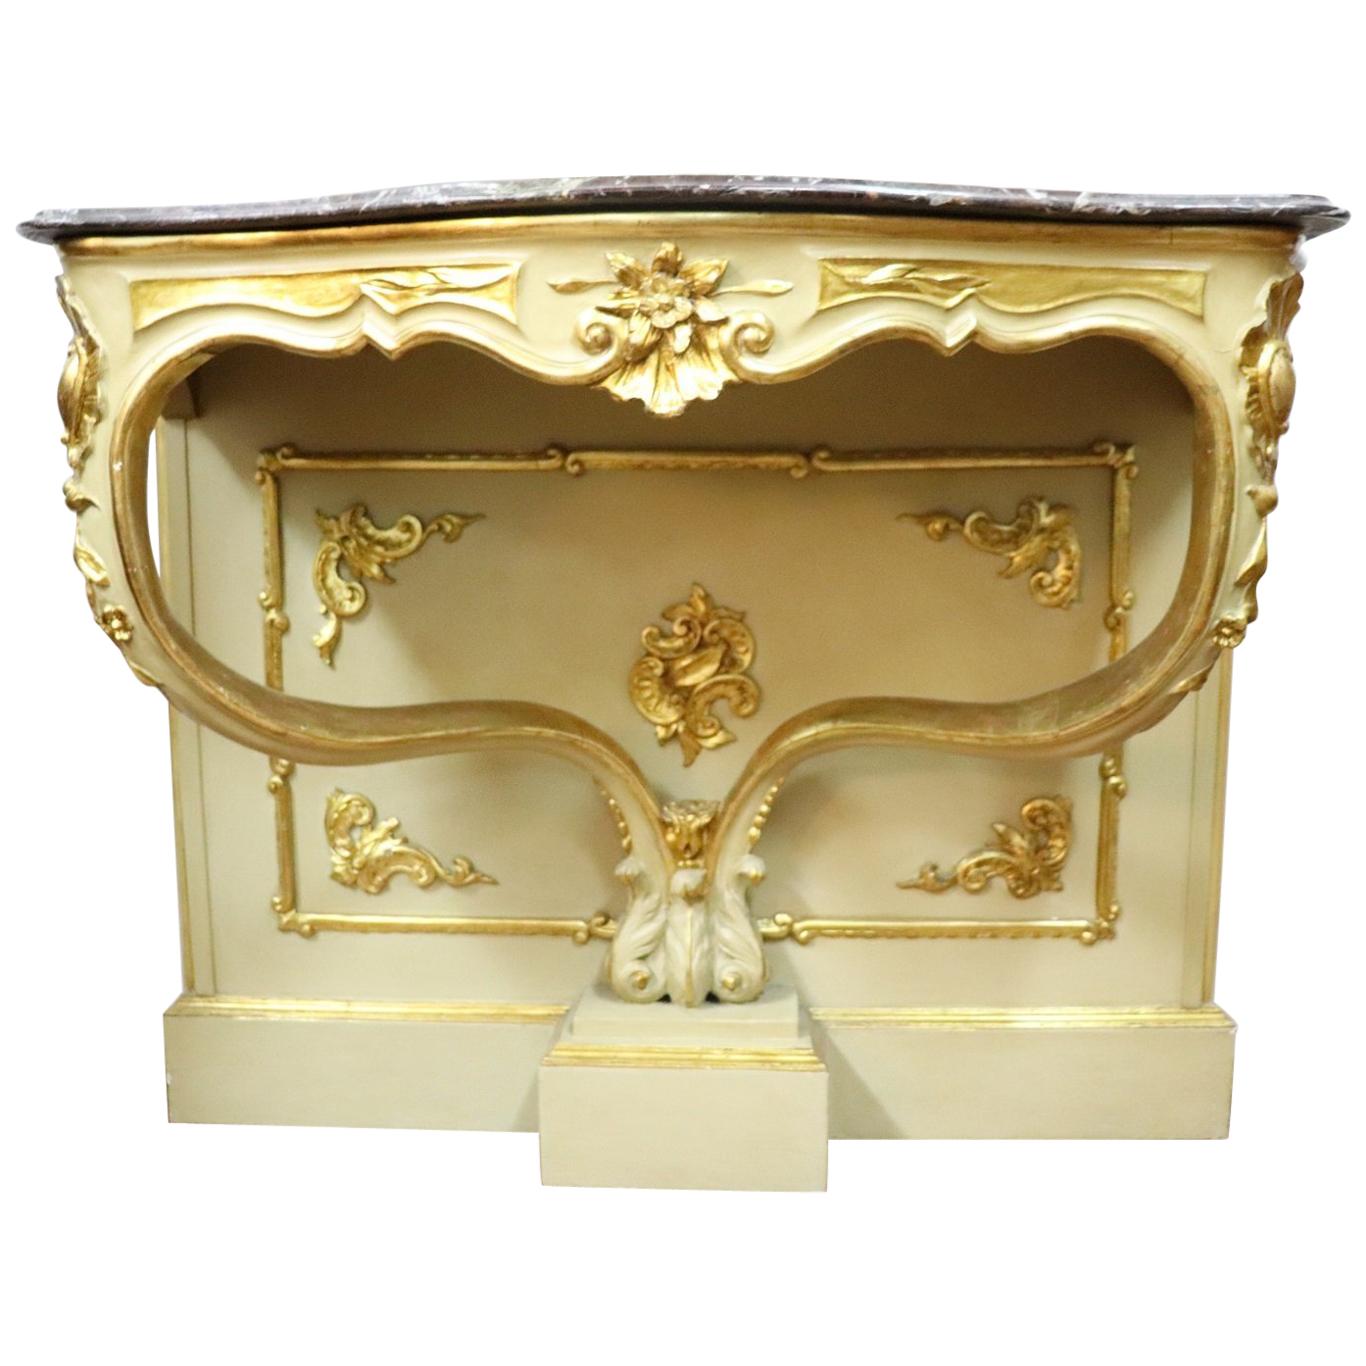 19th Century Italian Golden and Lacquered Wood Console Table with Marble Top